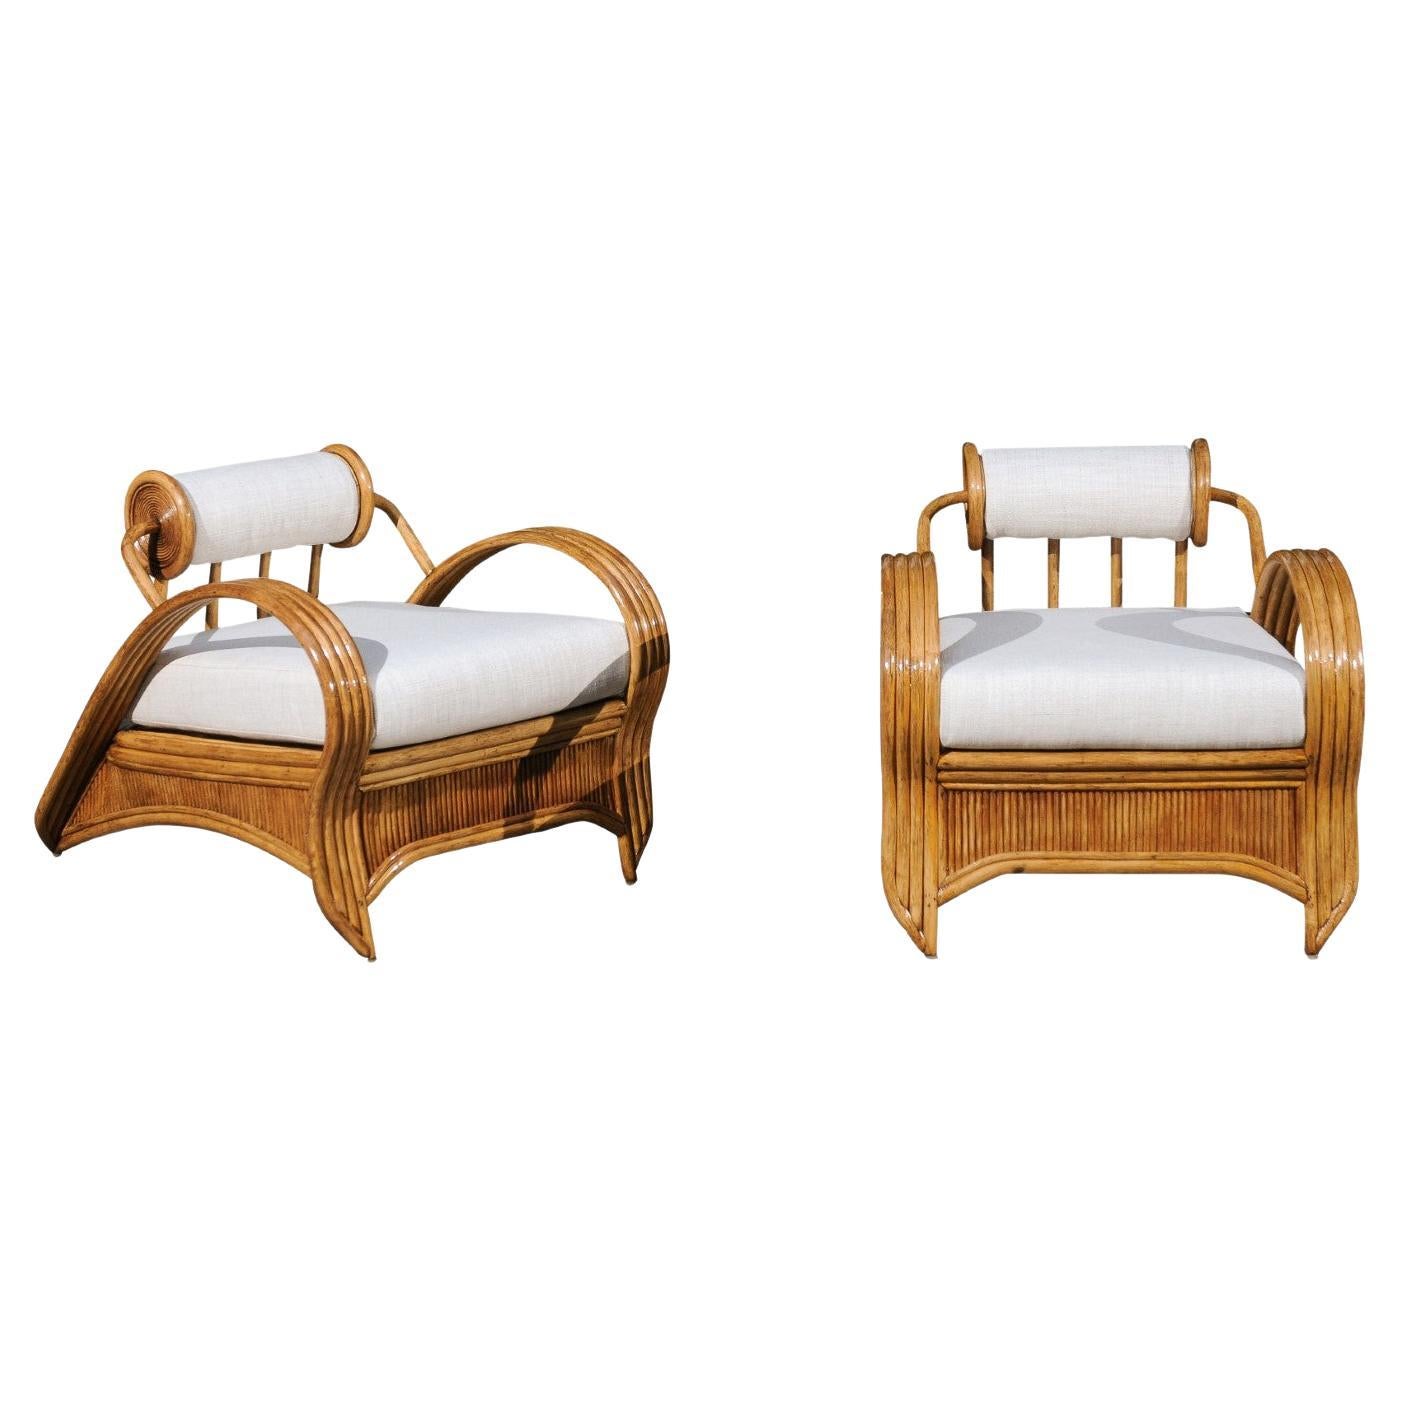 Extraordinary Pair of Art Deco Style Loungers by Betty Cobonpue, circa 1980